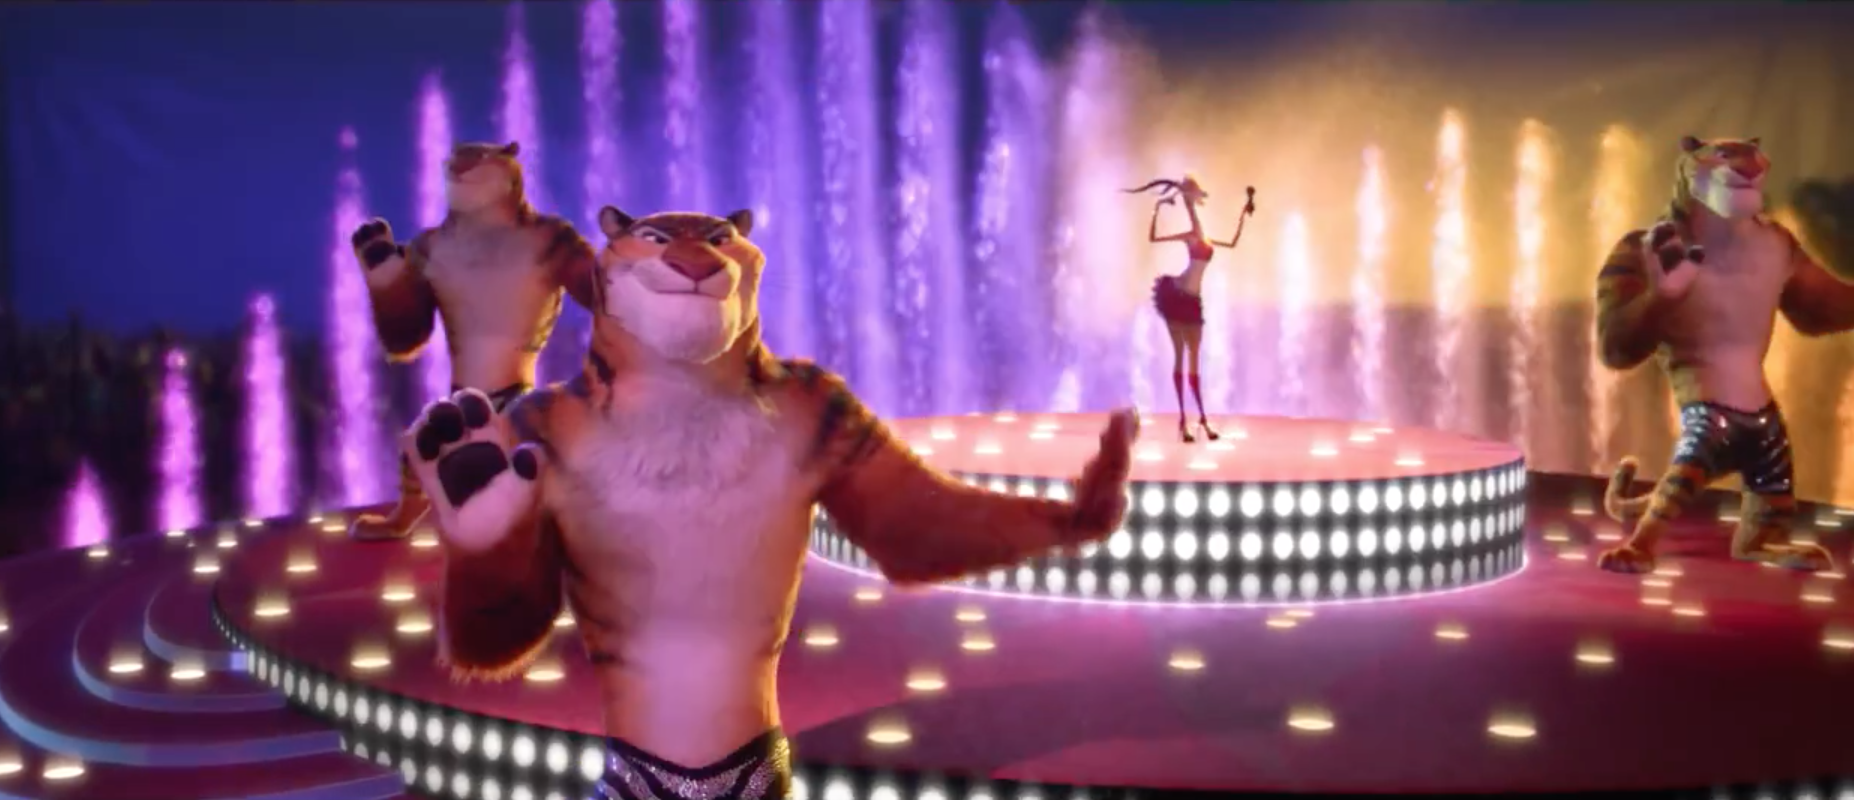 Image - Tigers Dancing on Stage.png | Zootopia Wiki | Fandom powered by